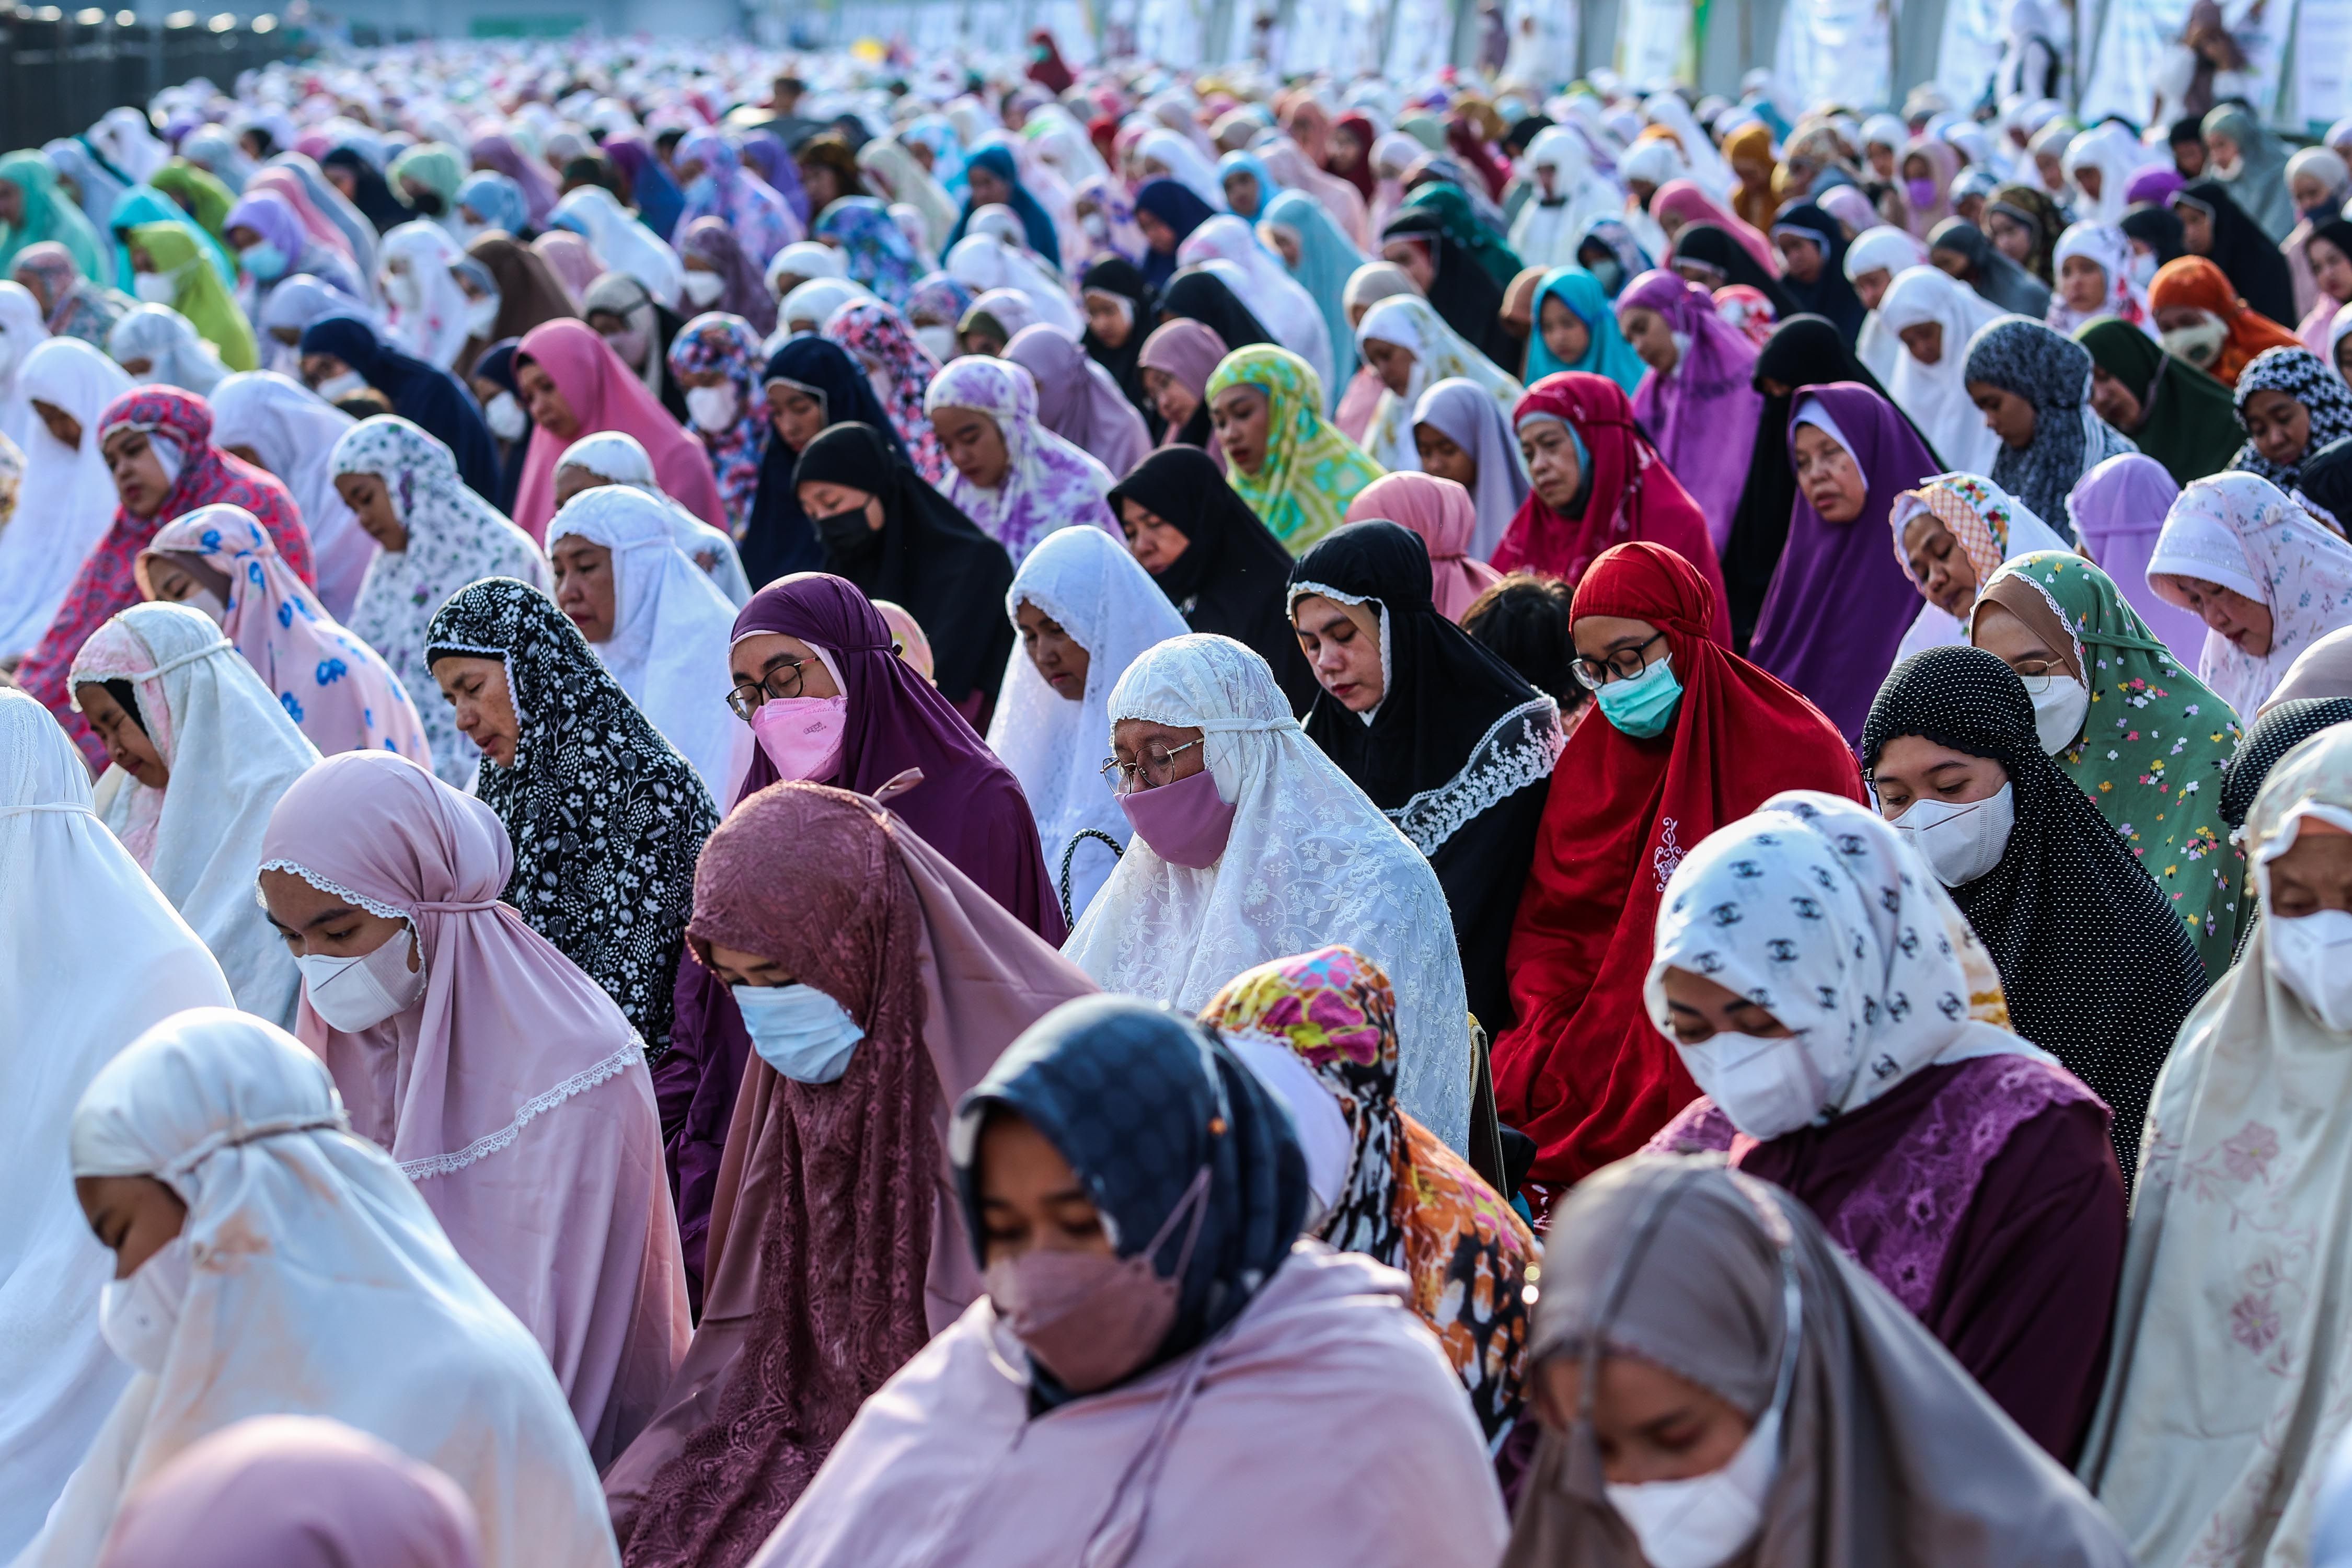 Muslim worshippers attend prayers during Eid al-Fitr, marking the end of the holy fasting month of Ramadan at the Jakarta International Stadium in Jakarta, Indonesia, May 2, 2022